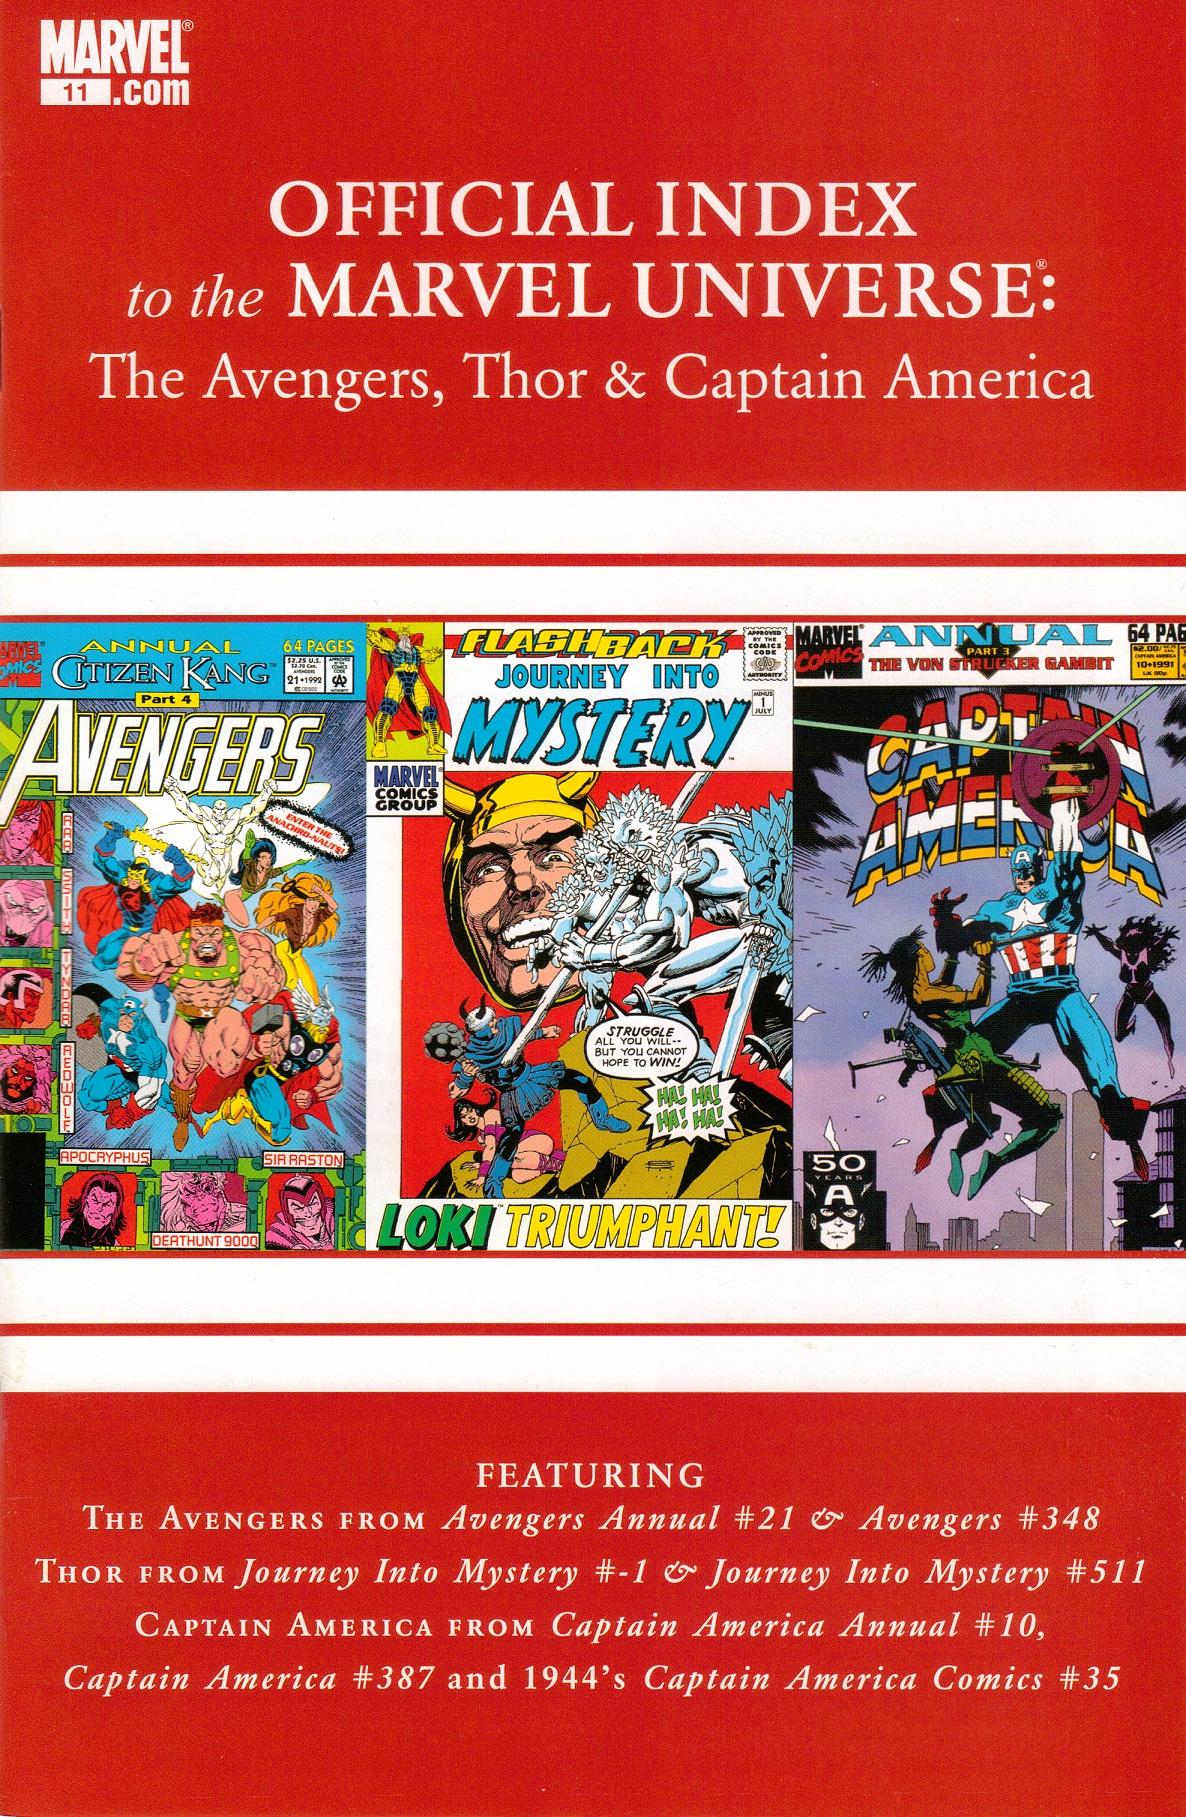 Avengers, Thor & Captain America: Official Index to the Marvel Universe Vol. 1 #11